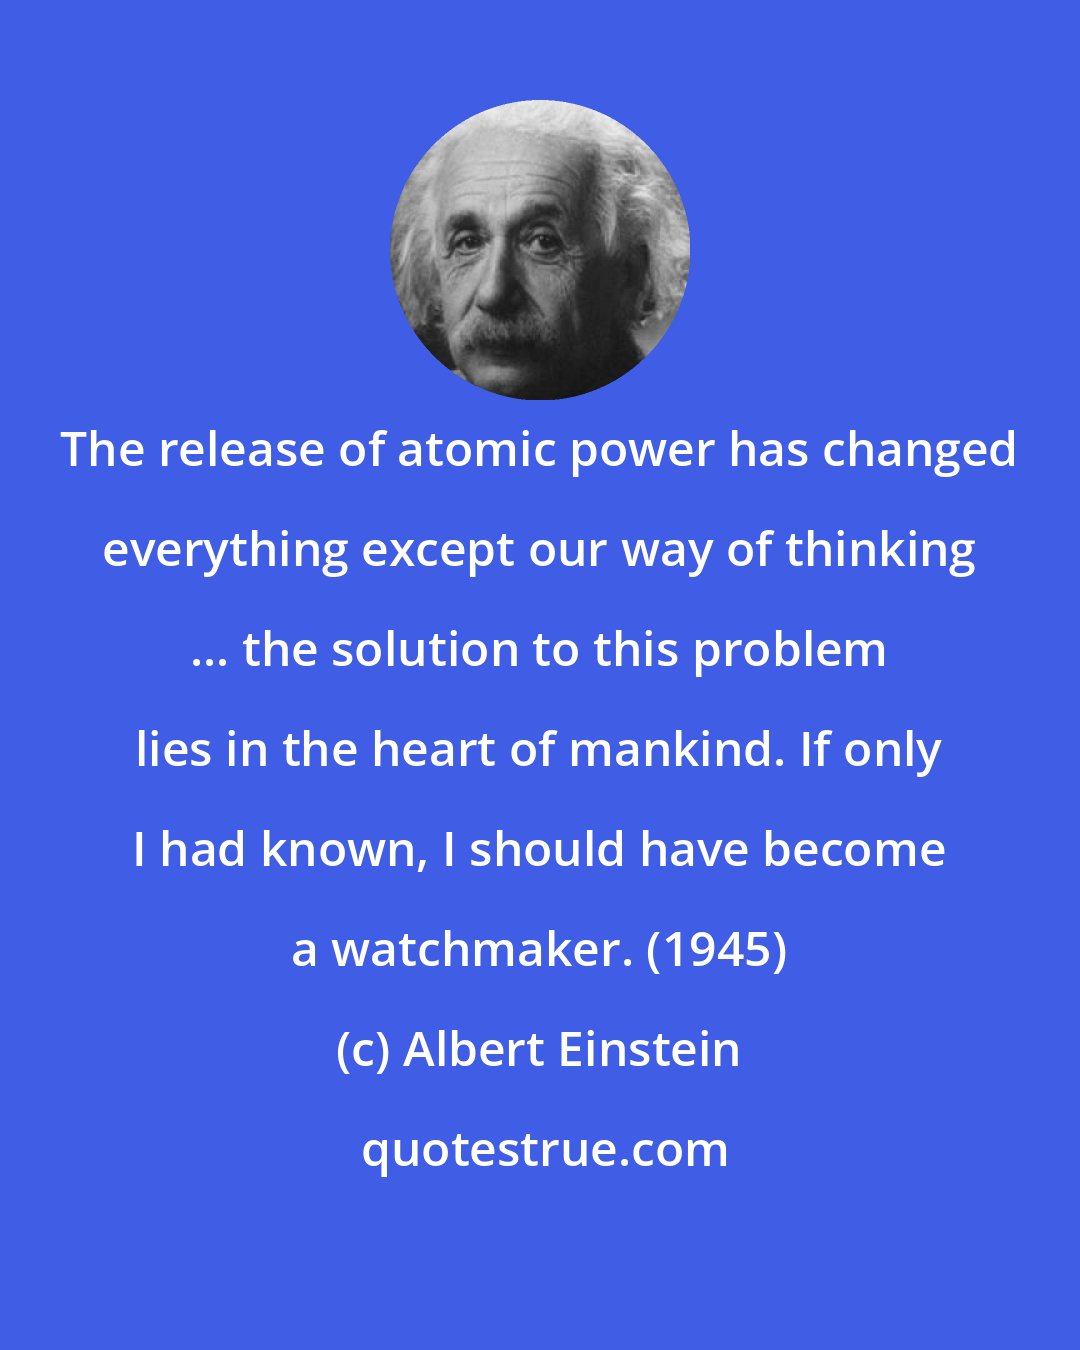 Albert Einstein: The release of atomic power has changed everything except our way of thinking ... the solution to this problem lies in the heart of mankind. If only I had known, I should have become a watchmaker. (1945)